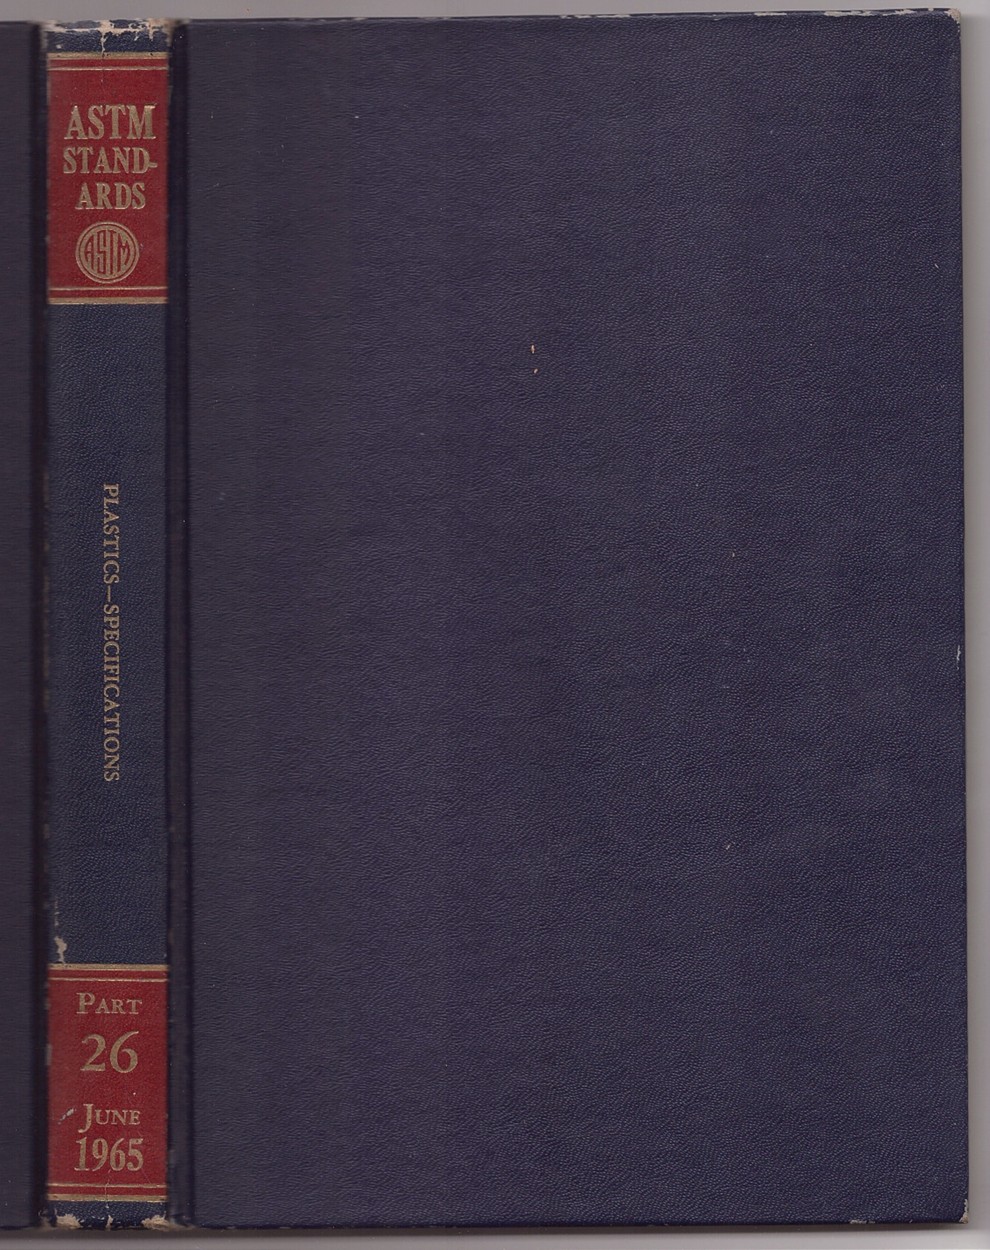  - 1965 Book of Astm Standards with Related Material Part 26 Plastics-